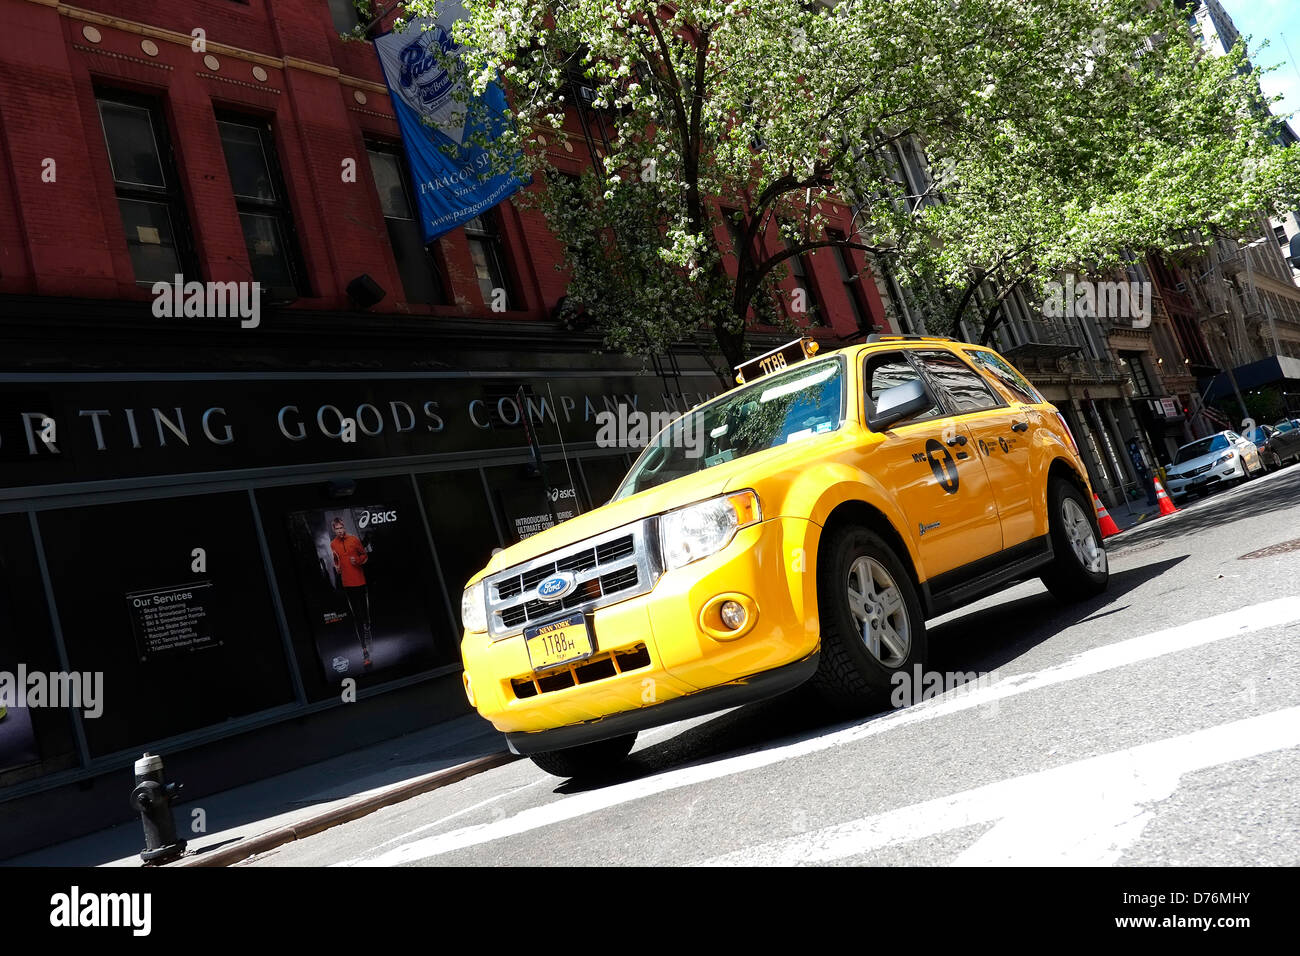 An iconic New York City yellow taxi cab pictured on a Manhattan street. Stock Photo